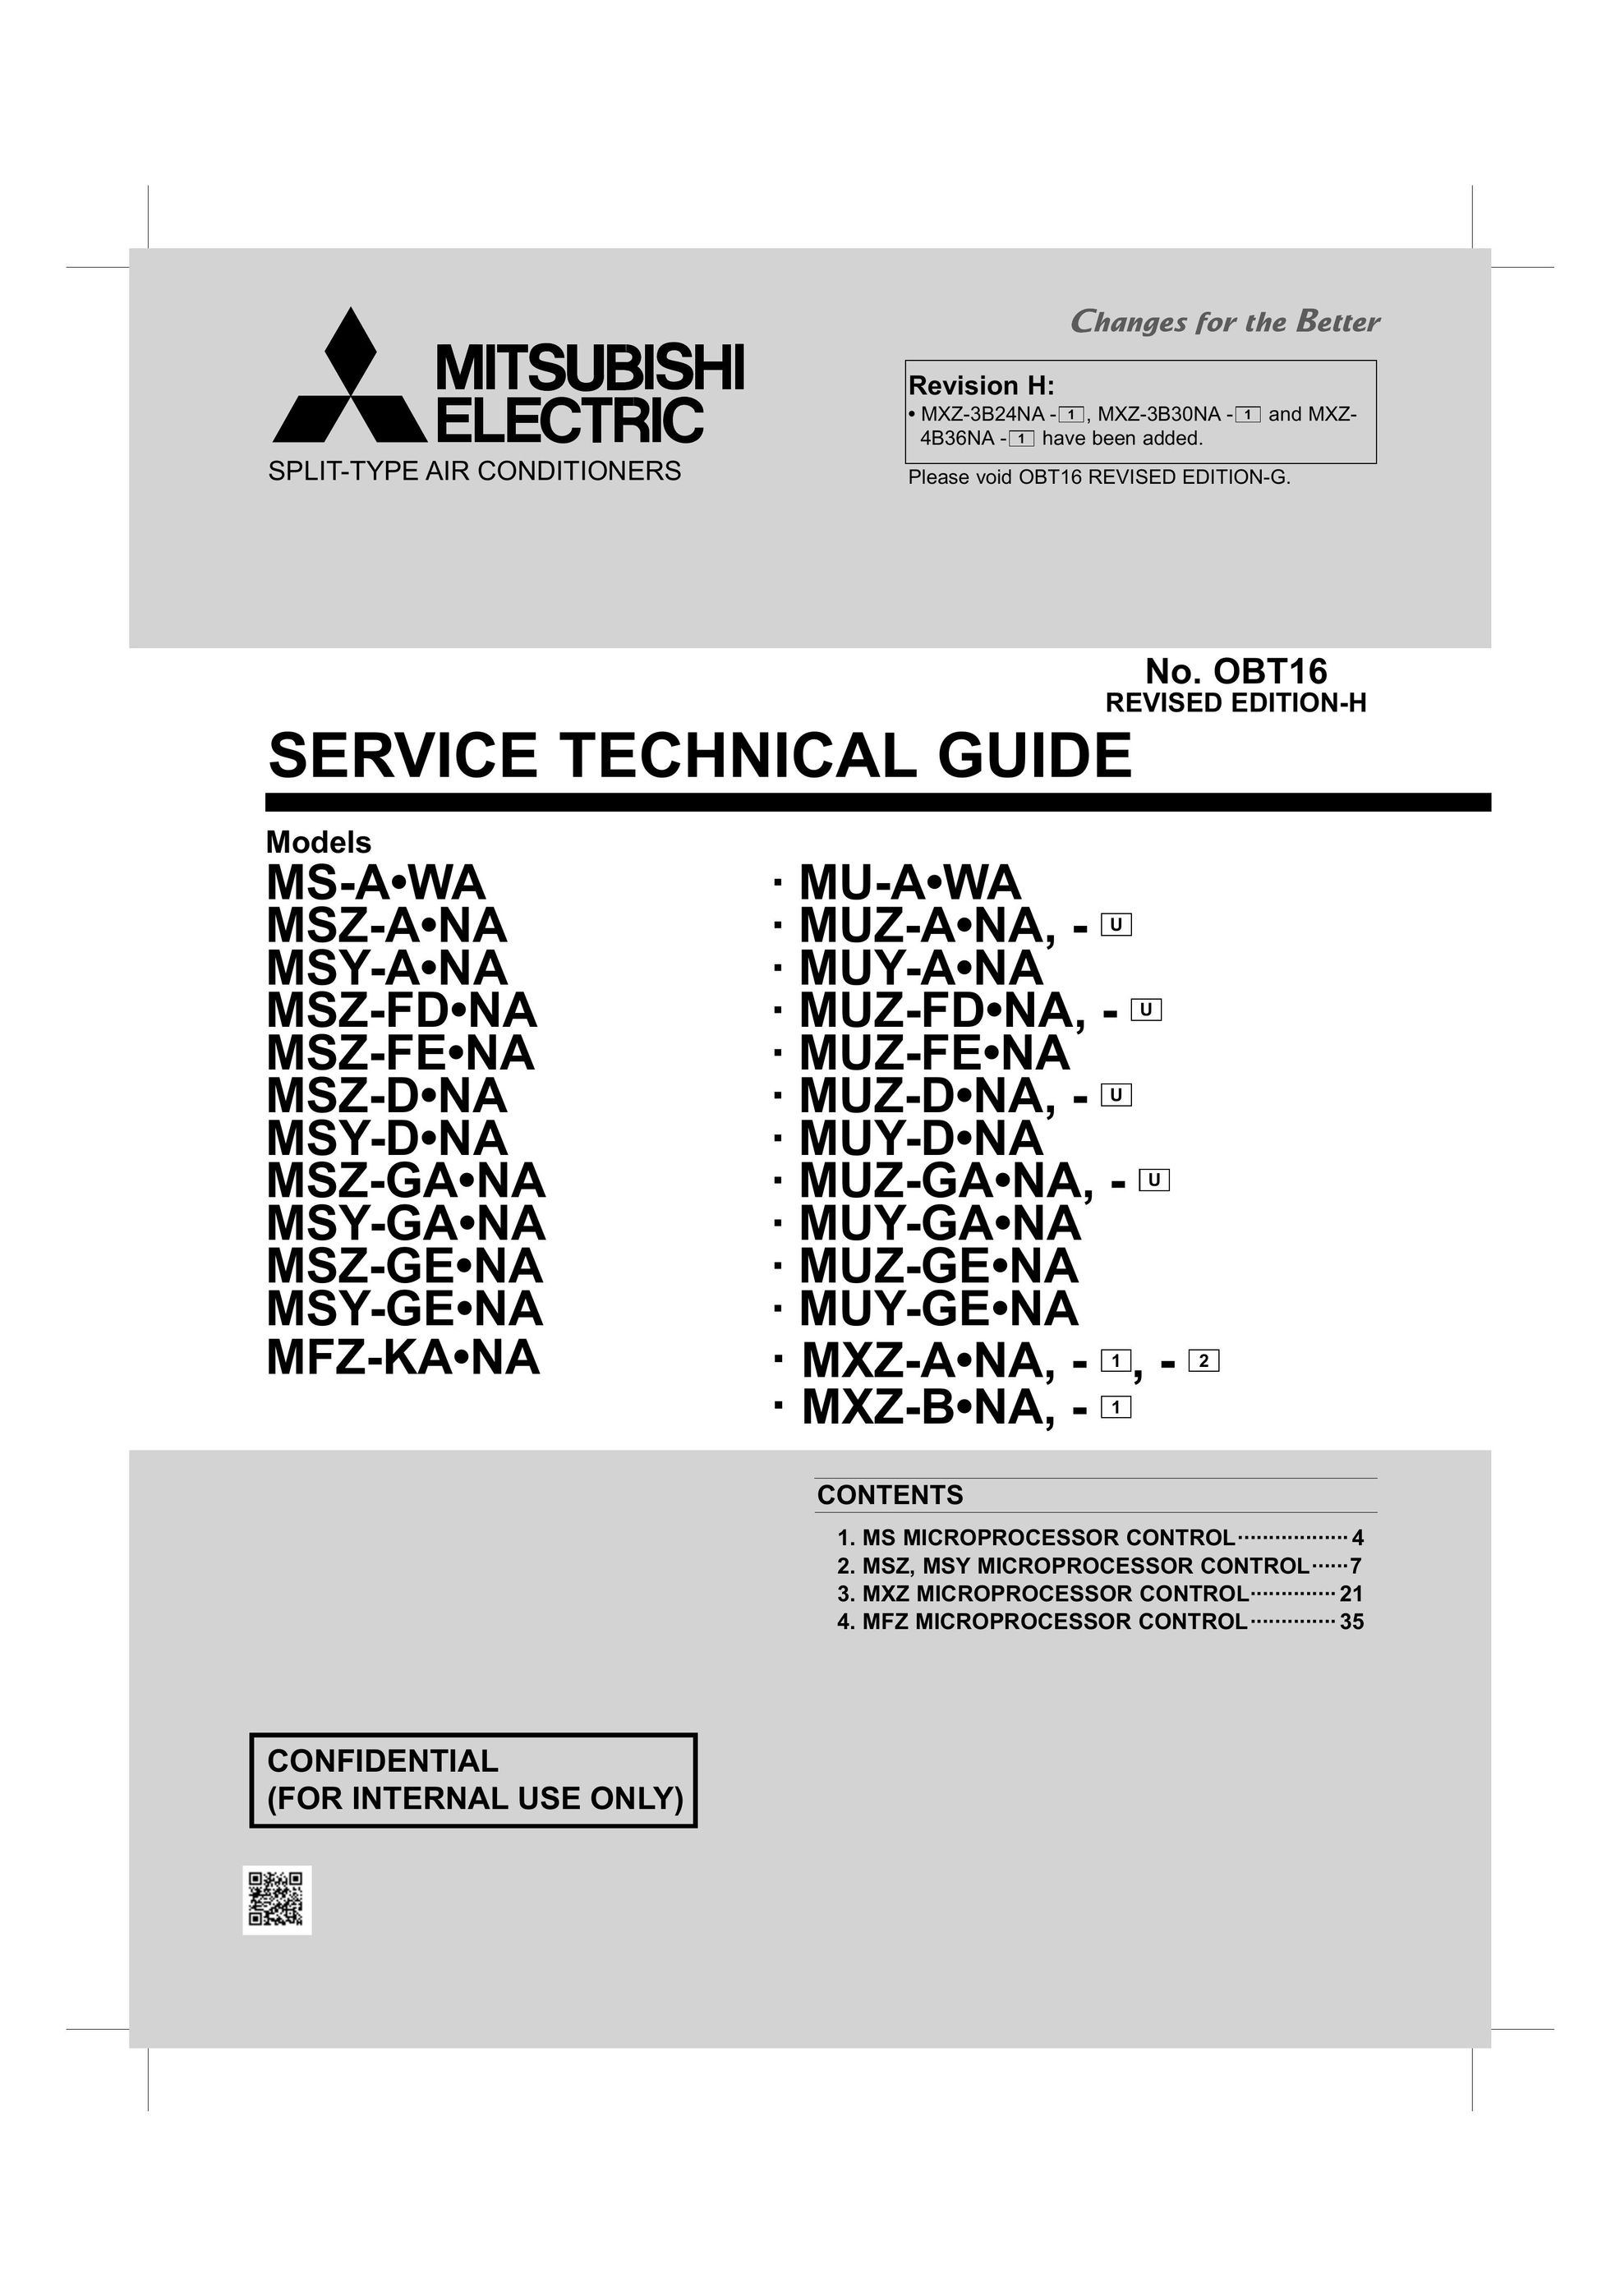 Mitsumi electronic MSY-DNA Air Conditioner User Manual